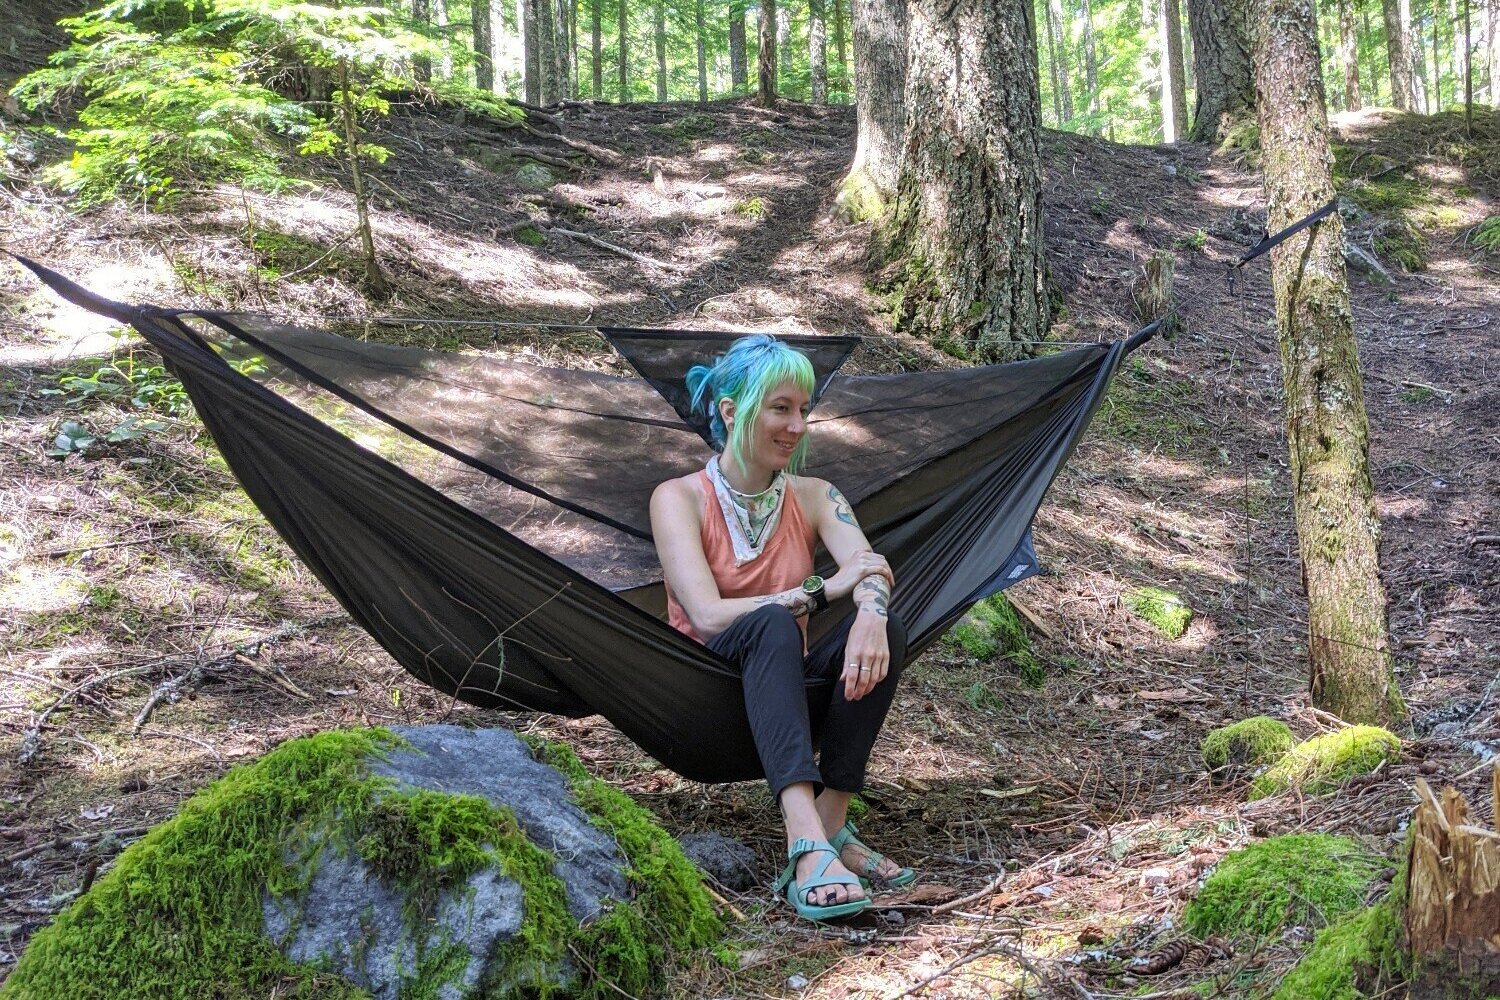 Tree Hammocks Portable 11 Ft Crabby Gear Kings Peak Camping Hammock Ultimate Hang Lightweight Double Hammock with 30 Second Suspension System Nylon Straps 